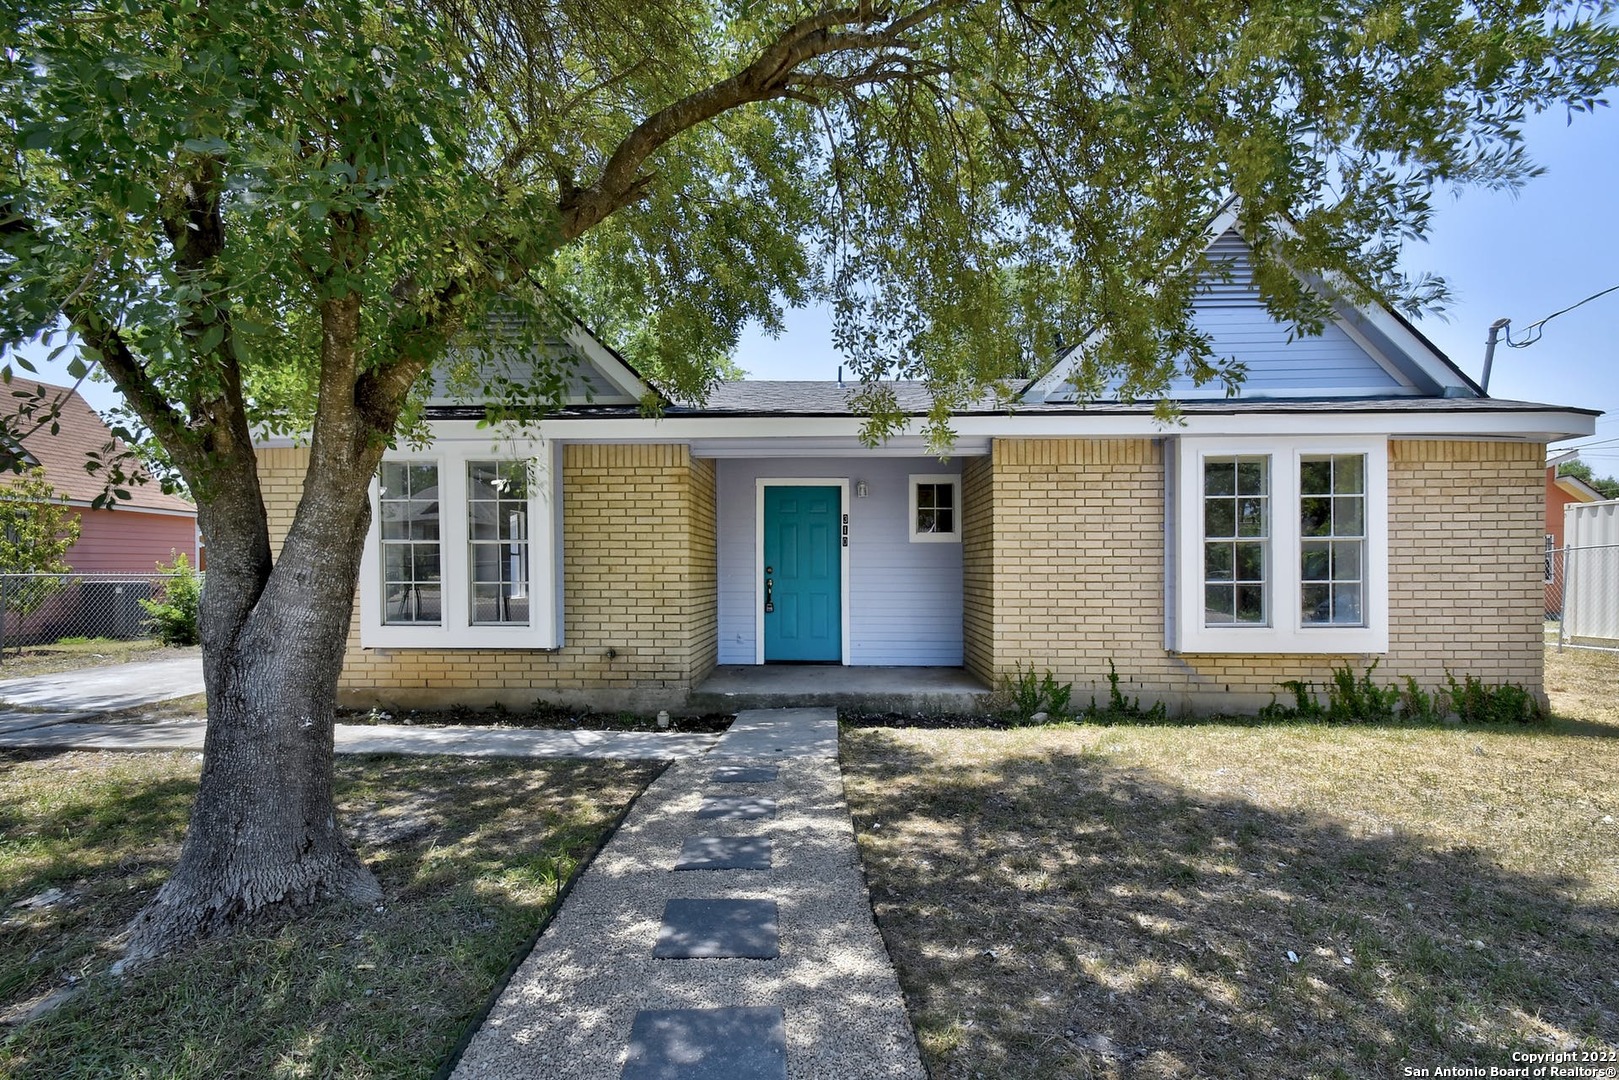 Centrally-located humble abode near downtown San Antonio! No carpet throughout the home, just brand new ceramic tile flooring. This 3-bedroom home has fresh paint and an updated bathroom. The living and dining area has an open feel and the entire home allows plenty of natural light to enter. It's the perfect starter home for a small family.